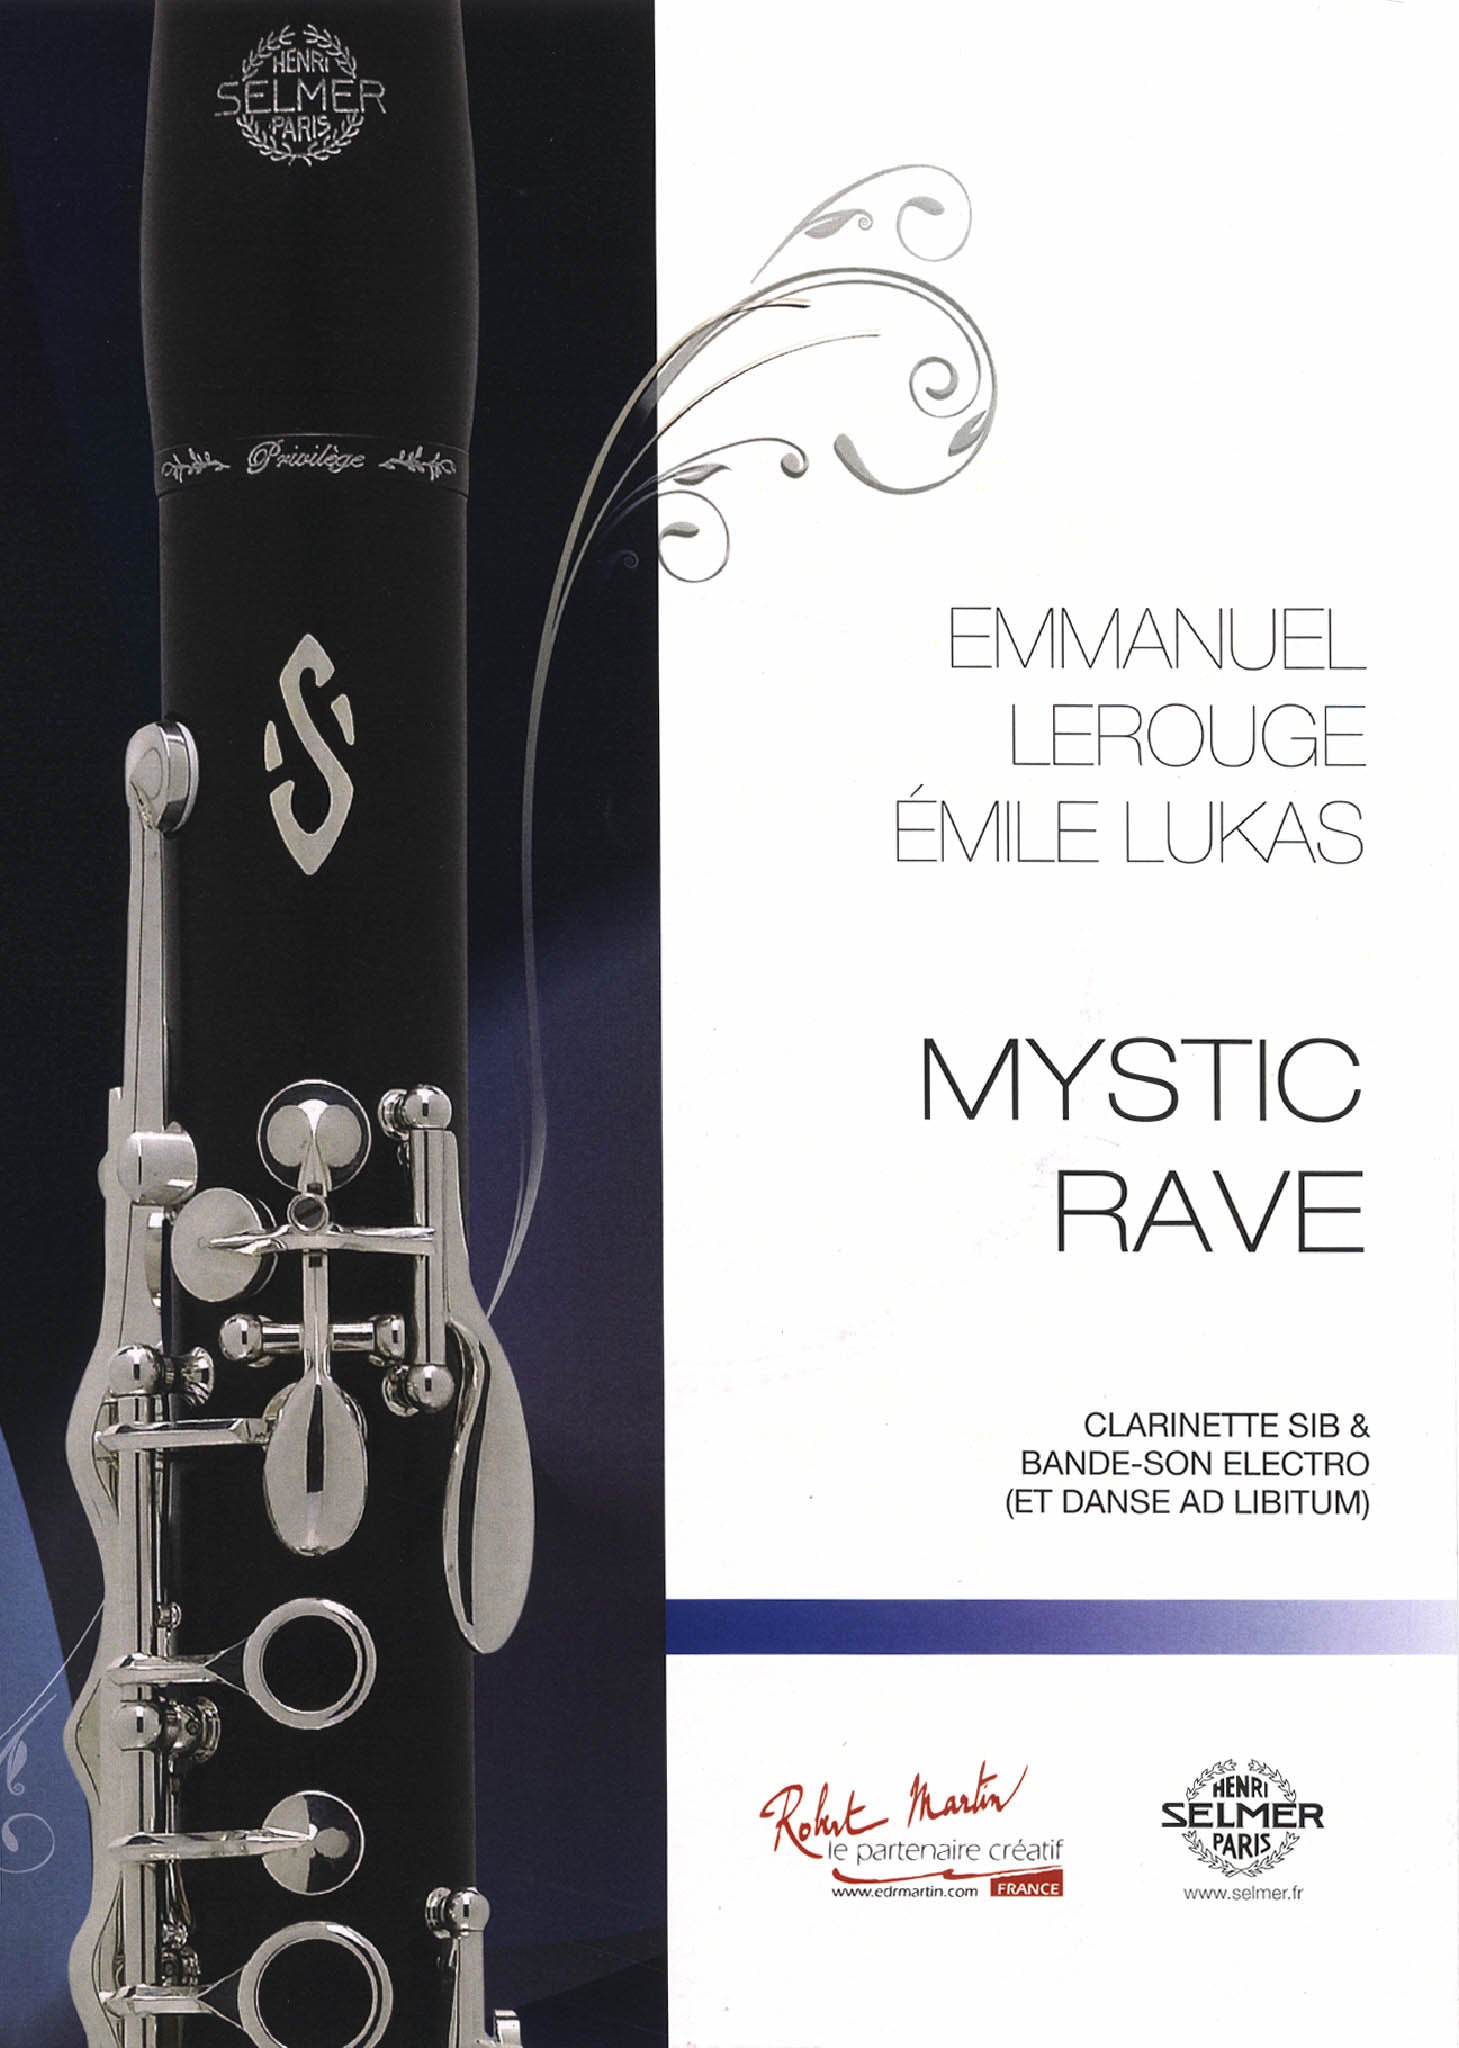 Lerouge Lukas Mystic Rave clarinet with audio cover